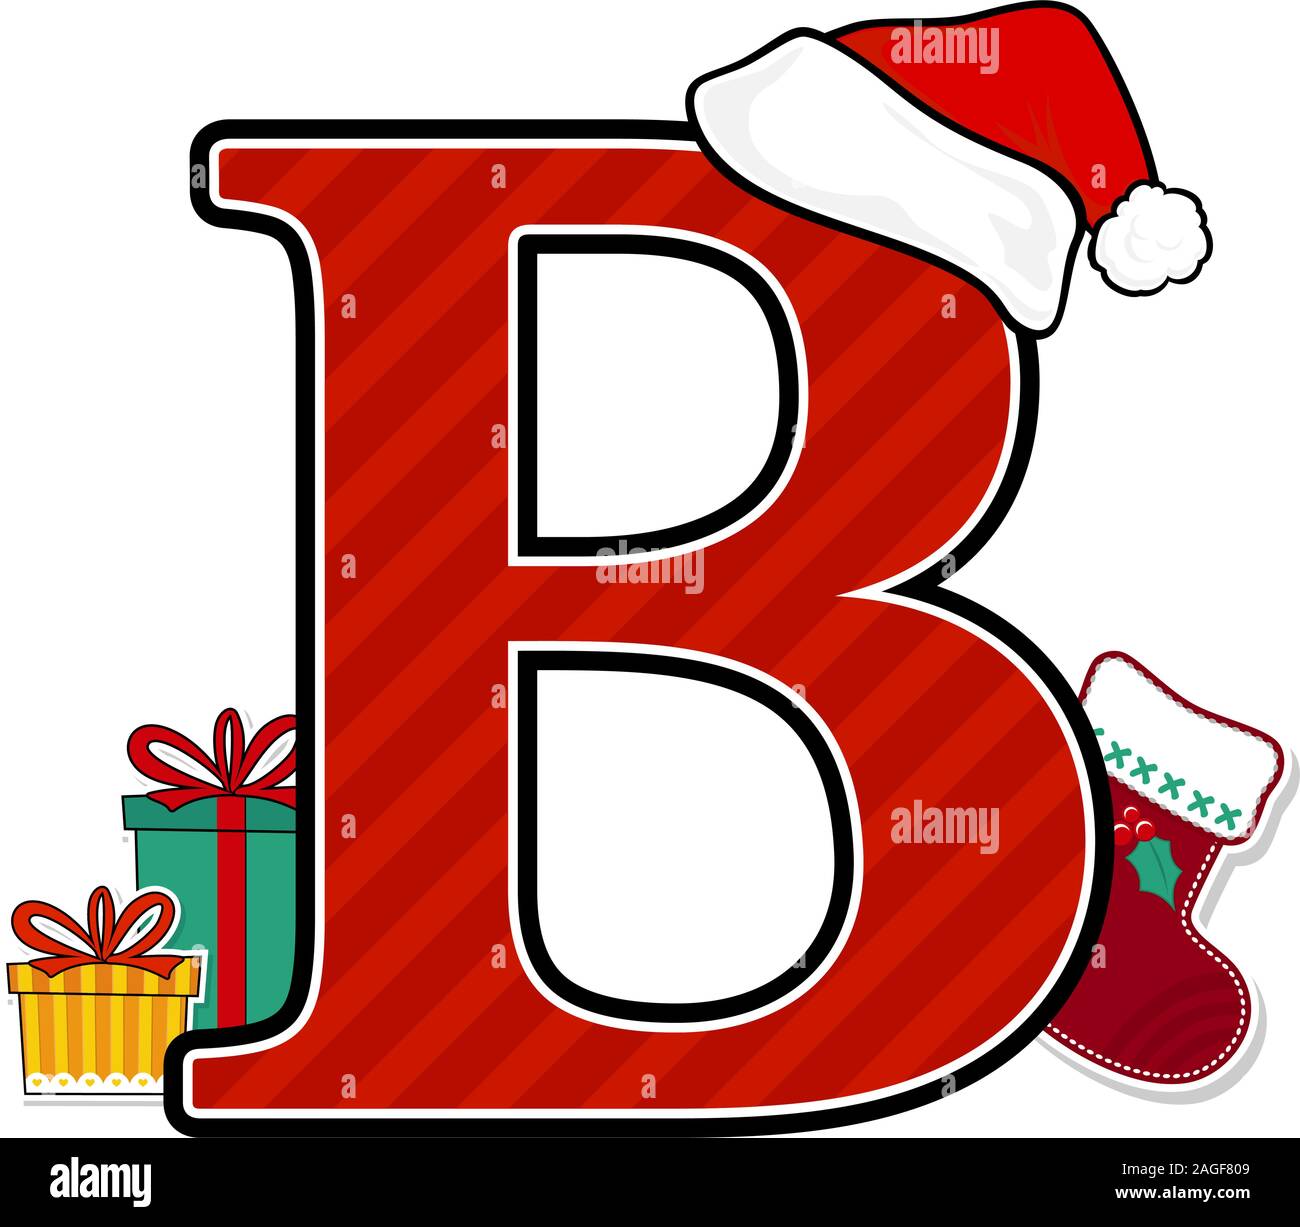 https://c8.alamy.com/comp/2AGF809/capital-letter-b-with-red-santas-hat-and-christmas-design-elements-isolated-on-white-background-can-be-used-for-holiday-season-card-nursery-decorat-2AGF809.jpg